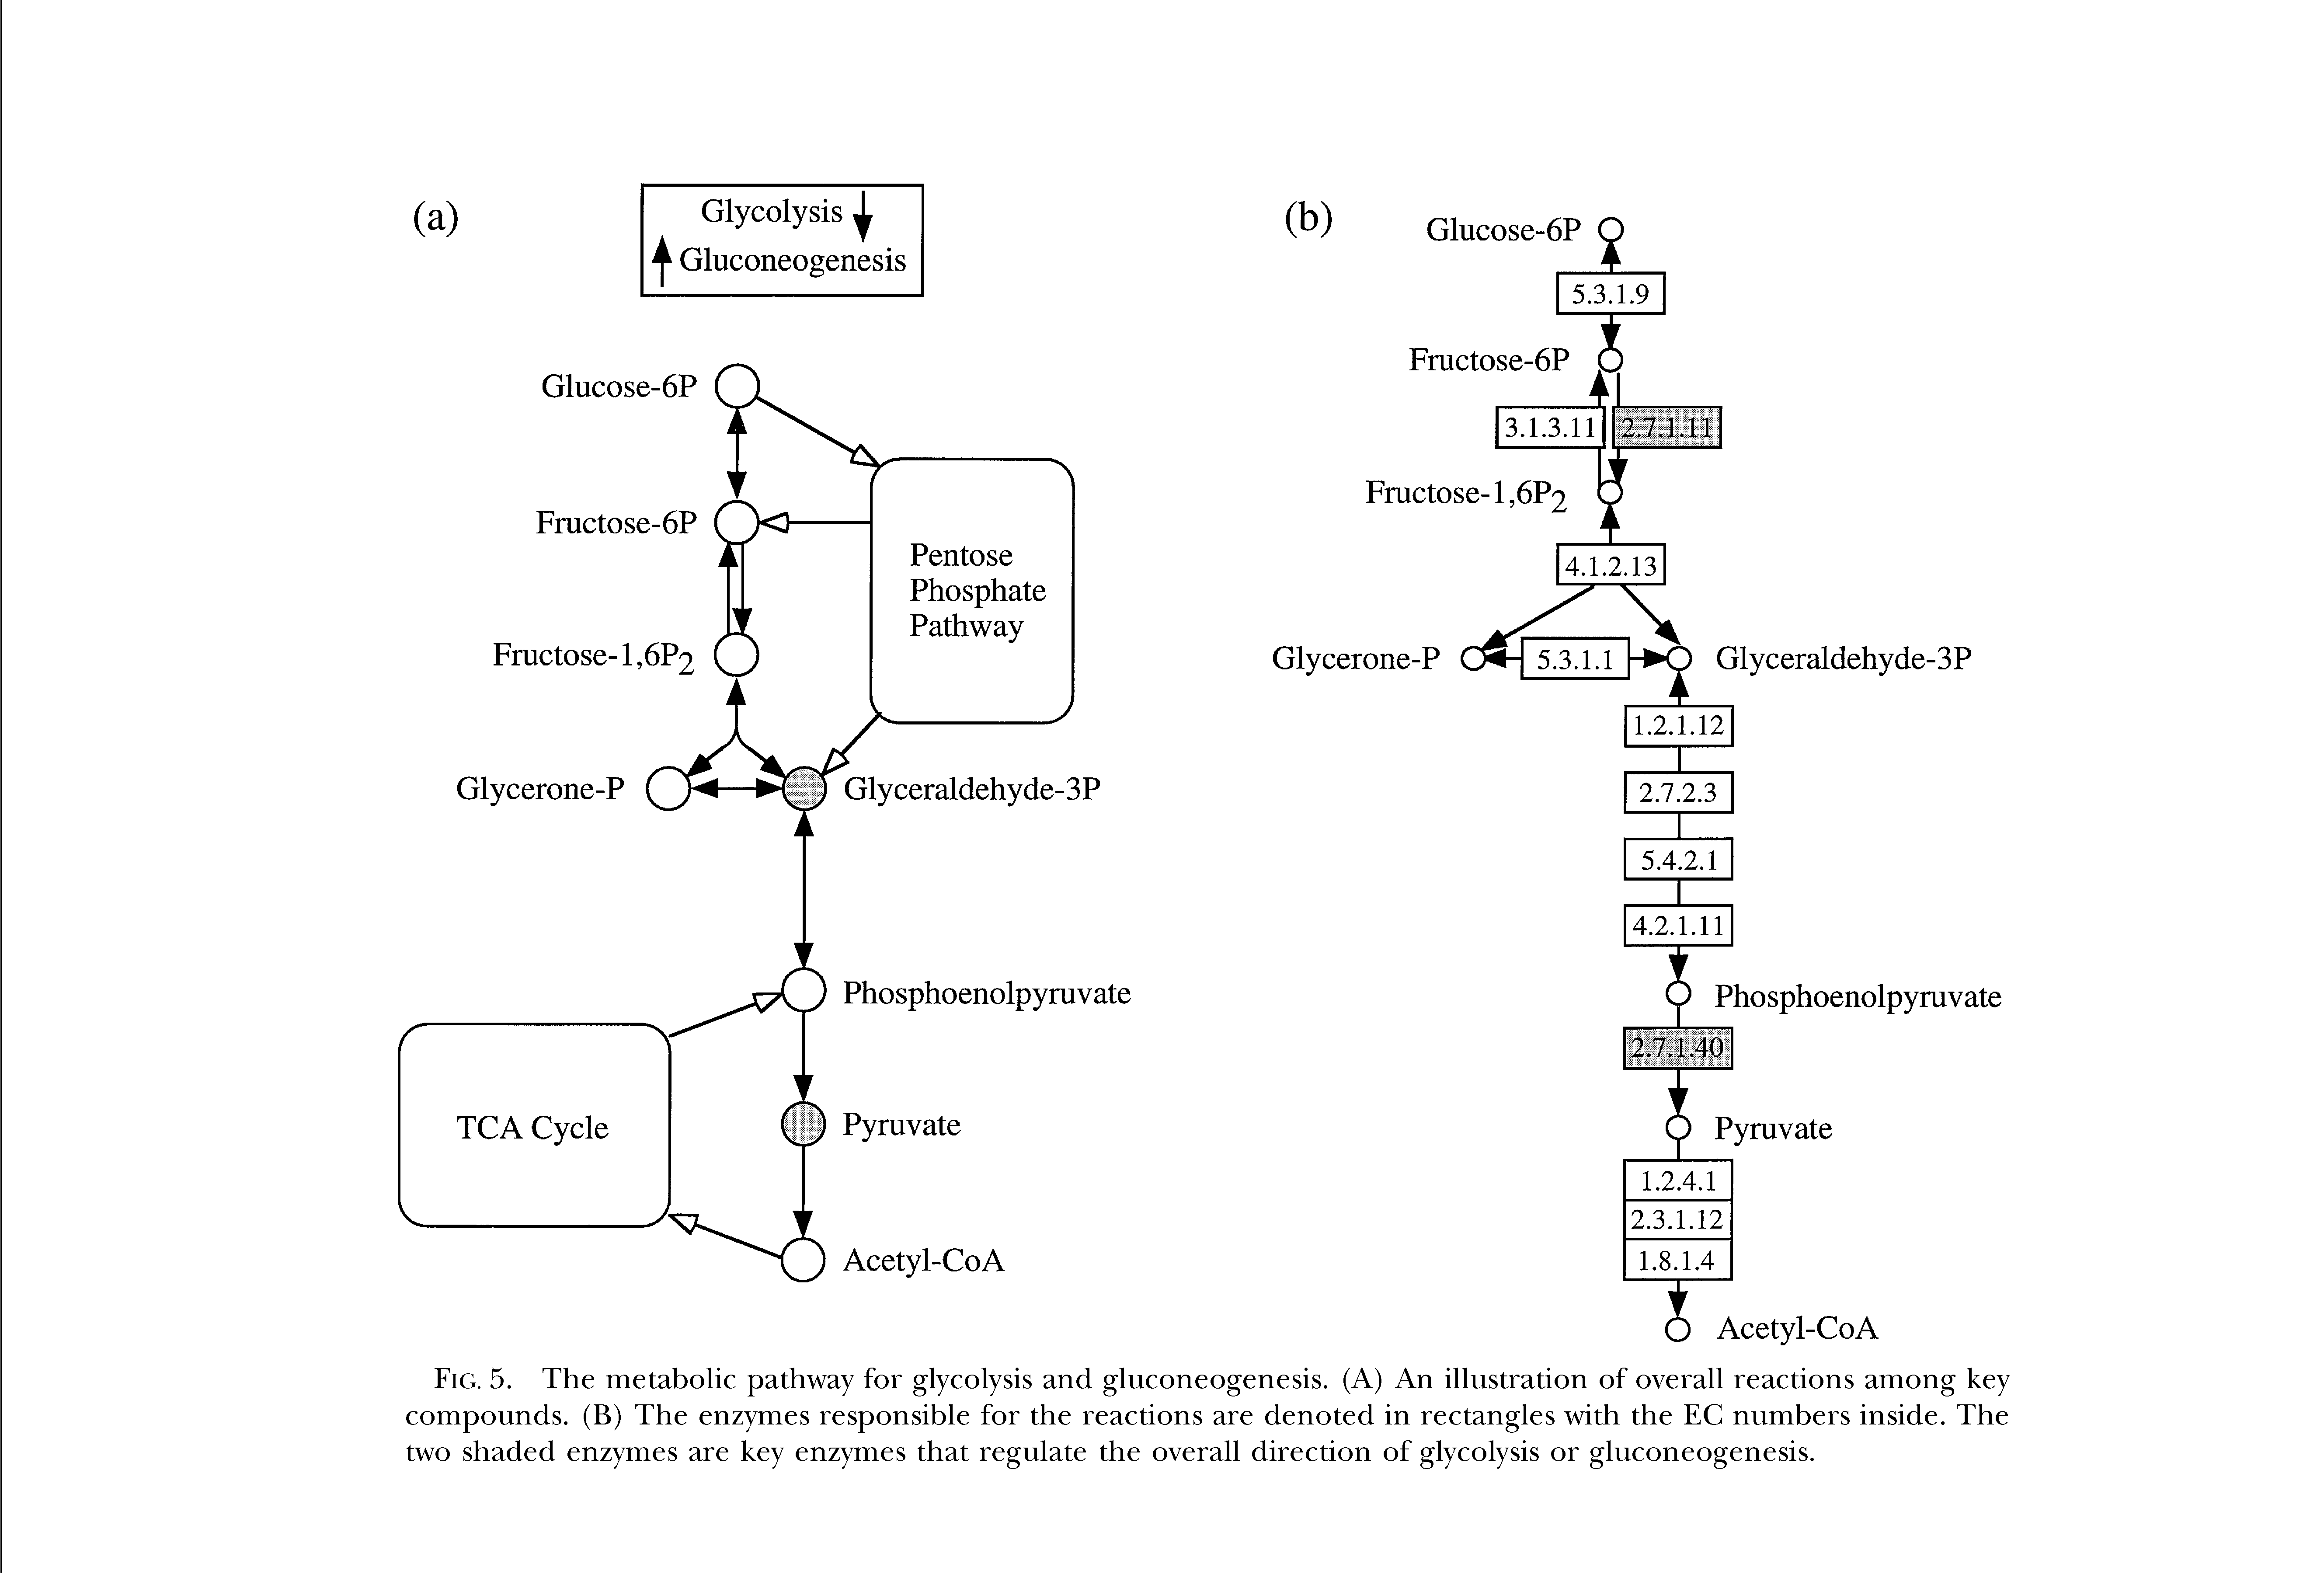 Fig. 5. The metabolic pathway for glycolysis and gluconeogenesis. (A) An illustration of overall reactions among key compounds. (B) The enzymes responsible for the reactions are denoted in rectangles with the EC numbers inside. The two shaded enzymes are key enzymes that regulate the overall direction of glycolysis or gluconeogenesis.